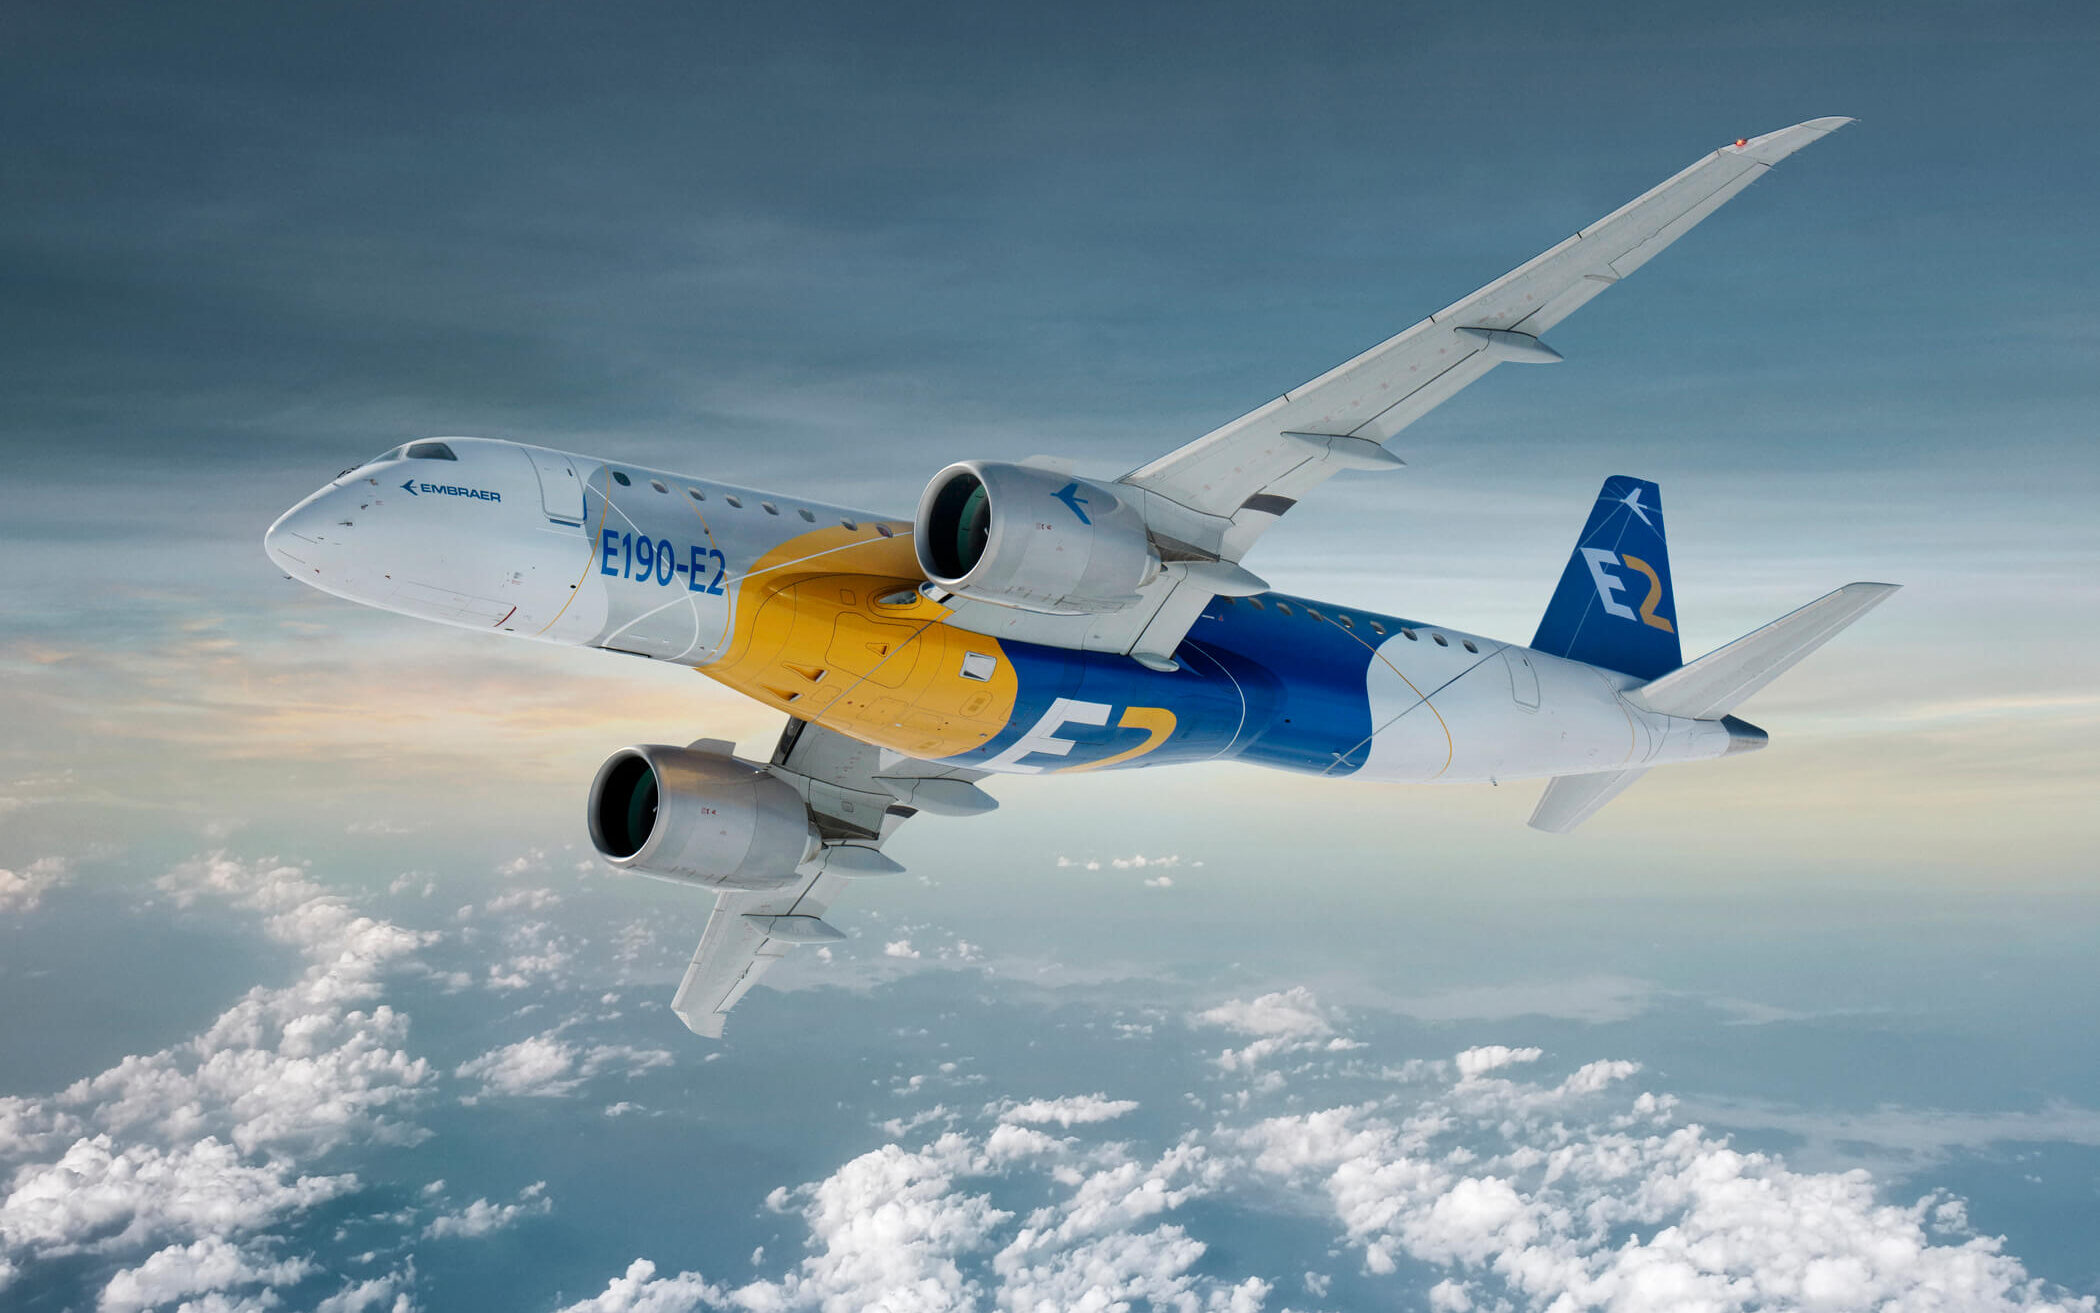 Embraer-E-jet ordered by star air for fleet upgradation